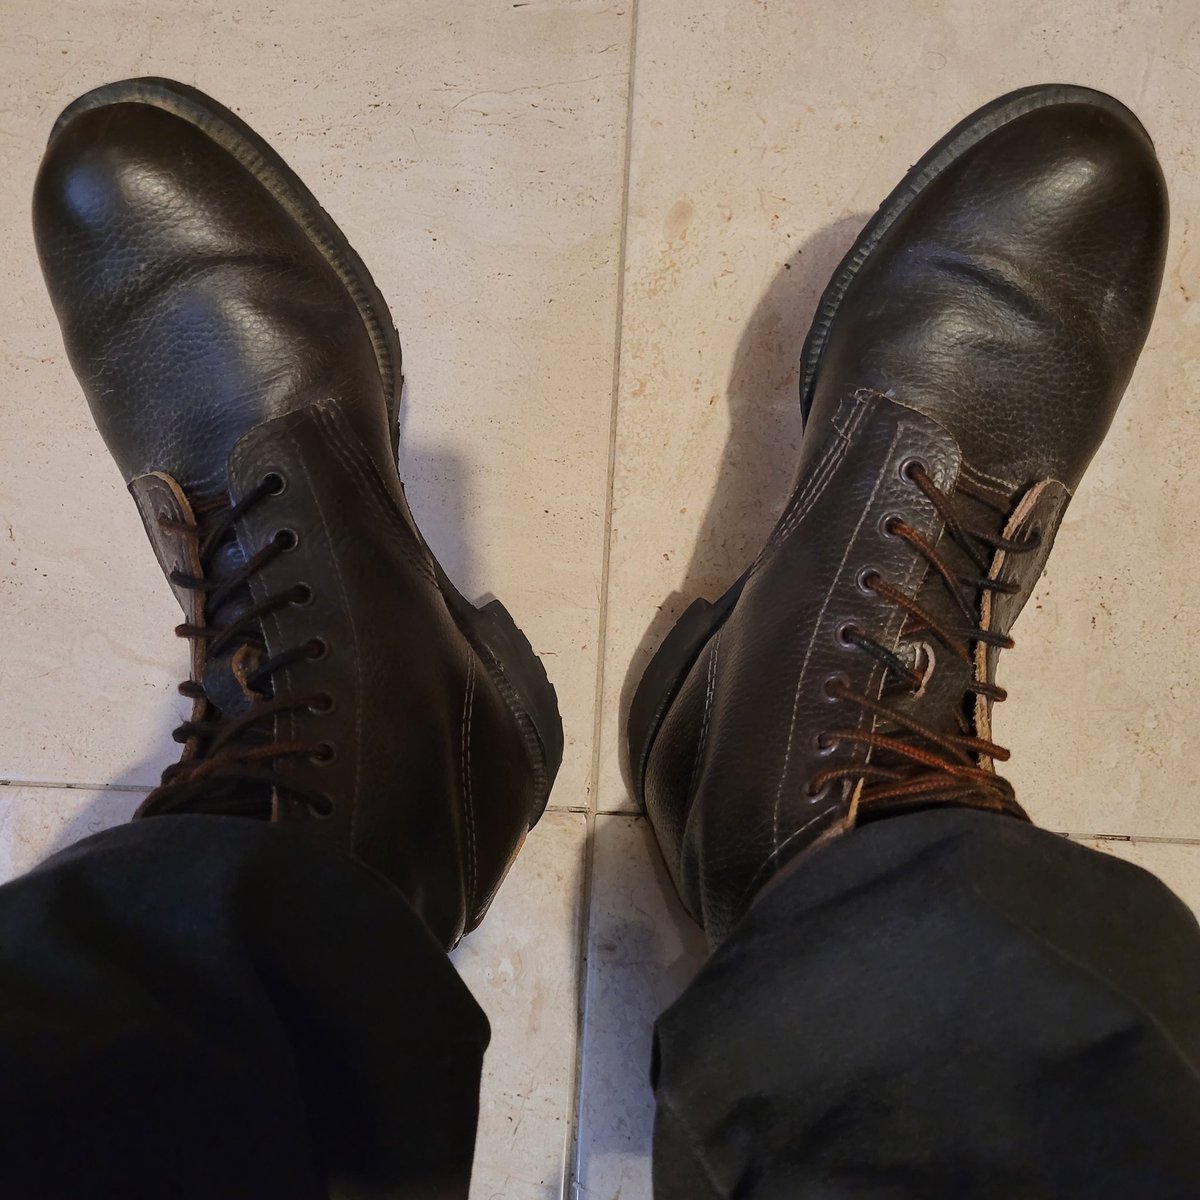 Was way too tired. From not doing much. Yesterday's Boot Pair: No. 71.